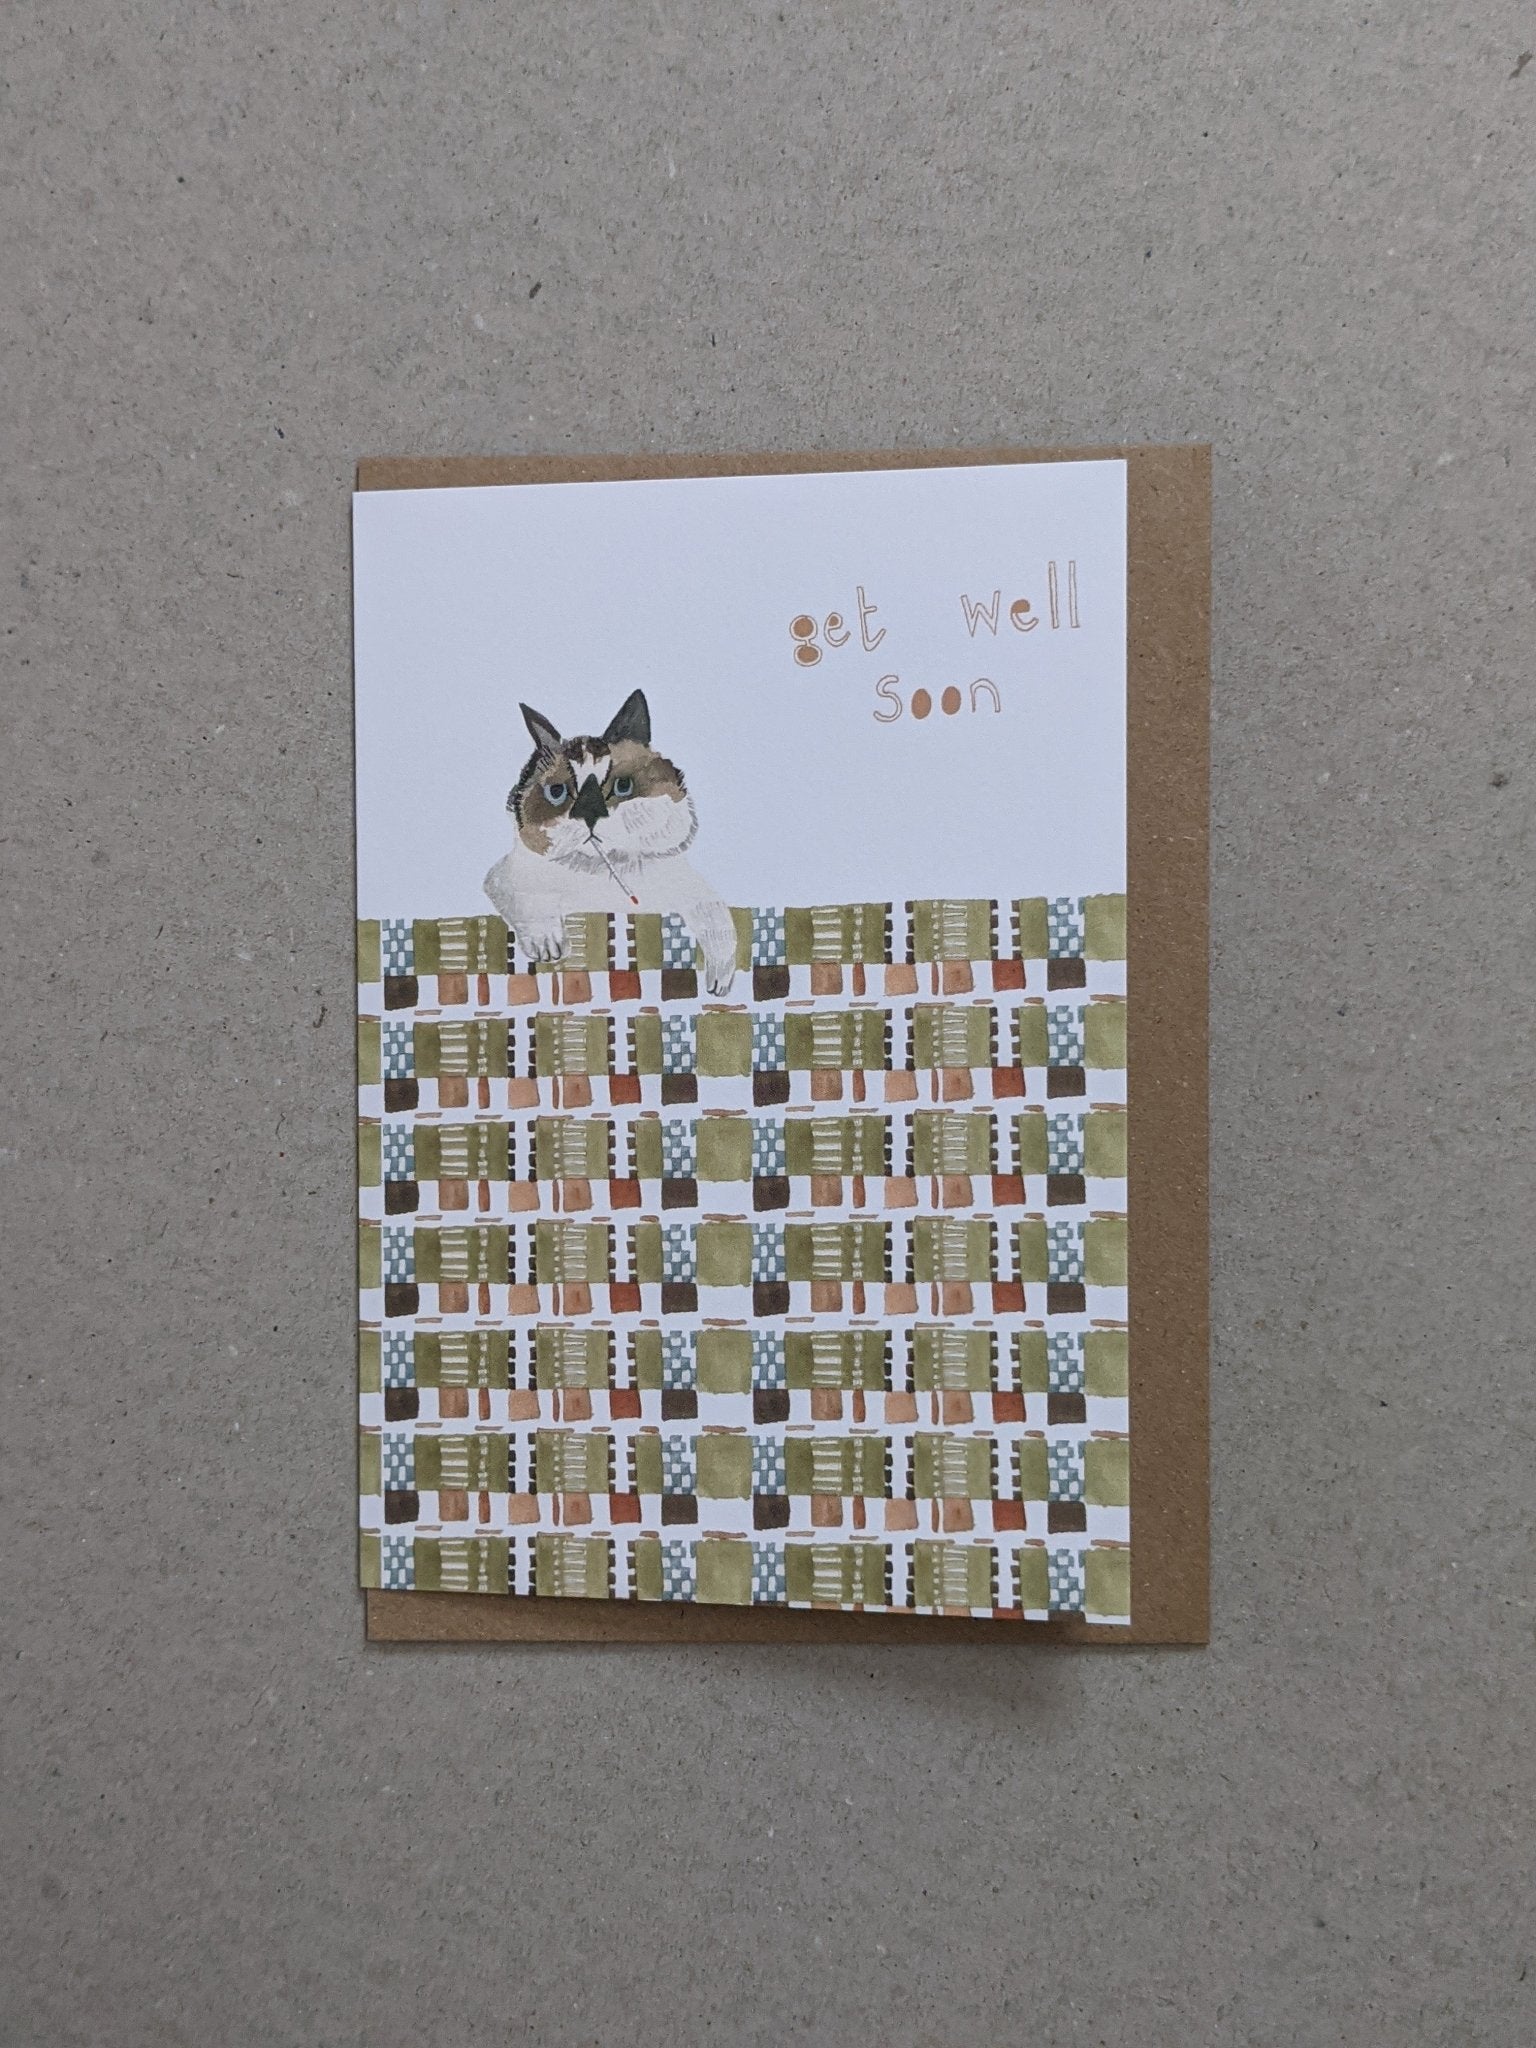 Get Well Soon Greetings Card - The Stationery Cupboard